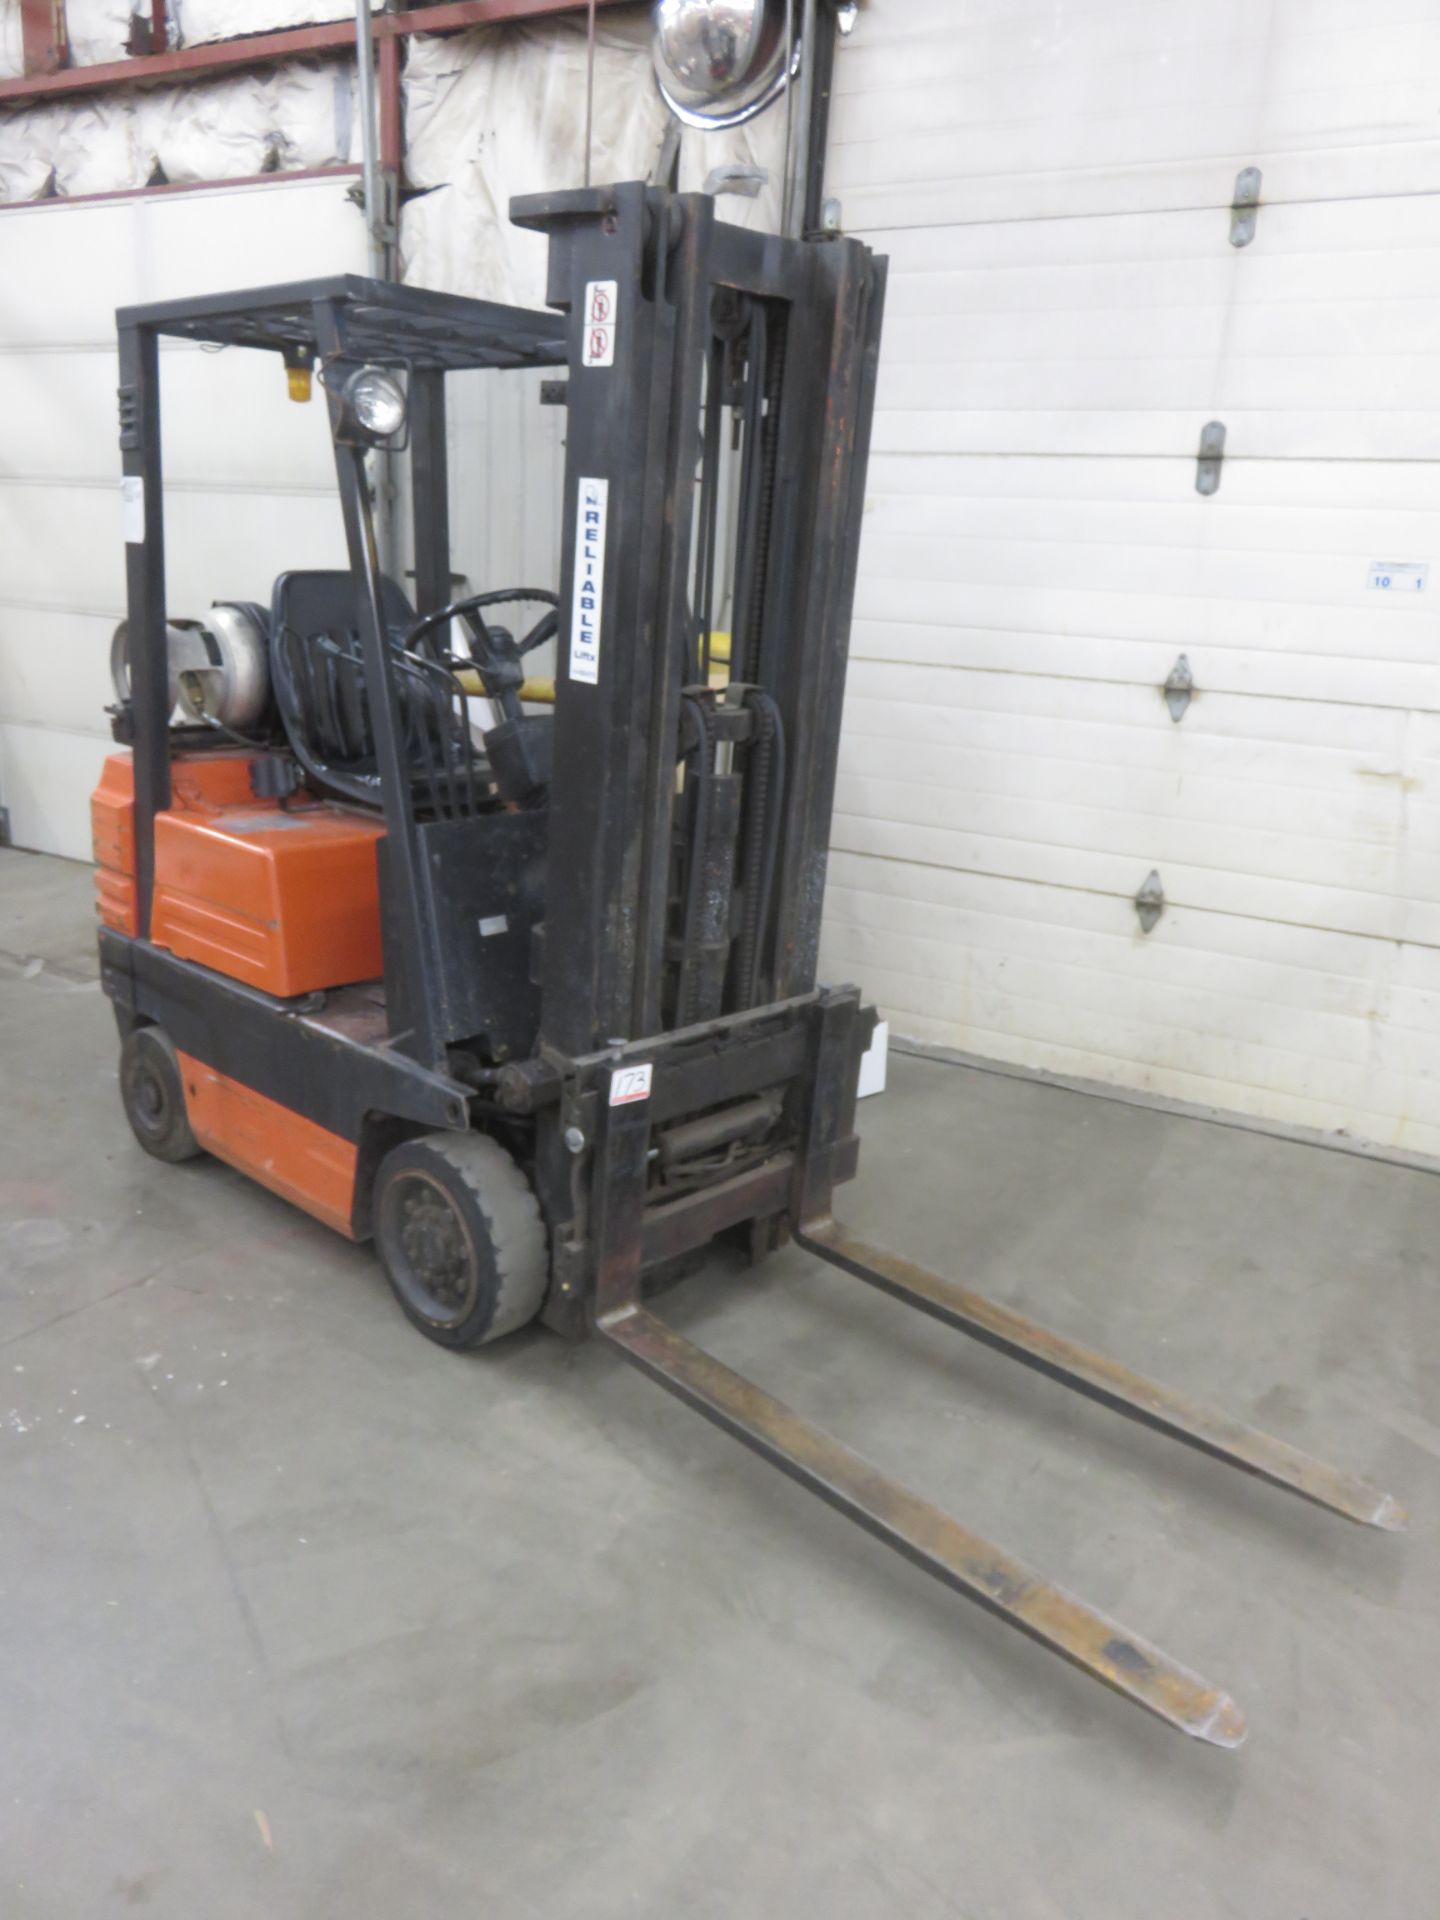 TOYOTA MOD 5 FGC15 3000LB CAP PROPANE POWERED FORKLIFT C/W 169"H LIFT, 3-STAGE MAST, & SIDE